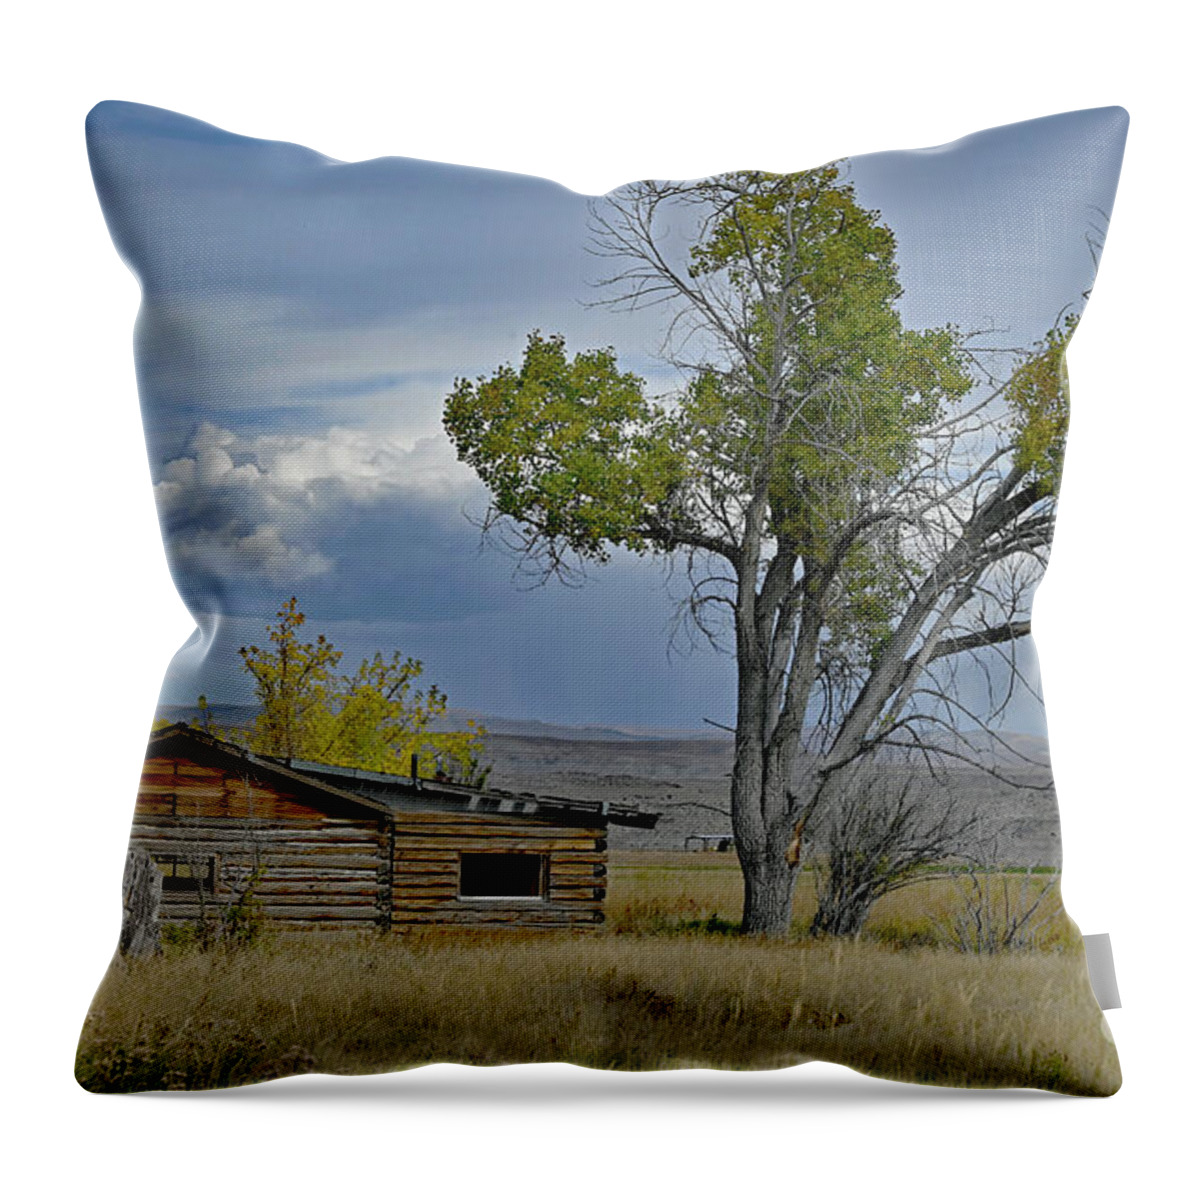 Wyoming Throw Pillow featuring the photograph Beyond Repair by Debby Pueschel